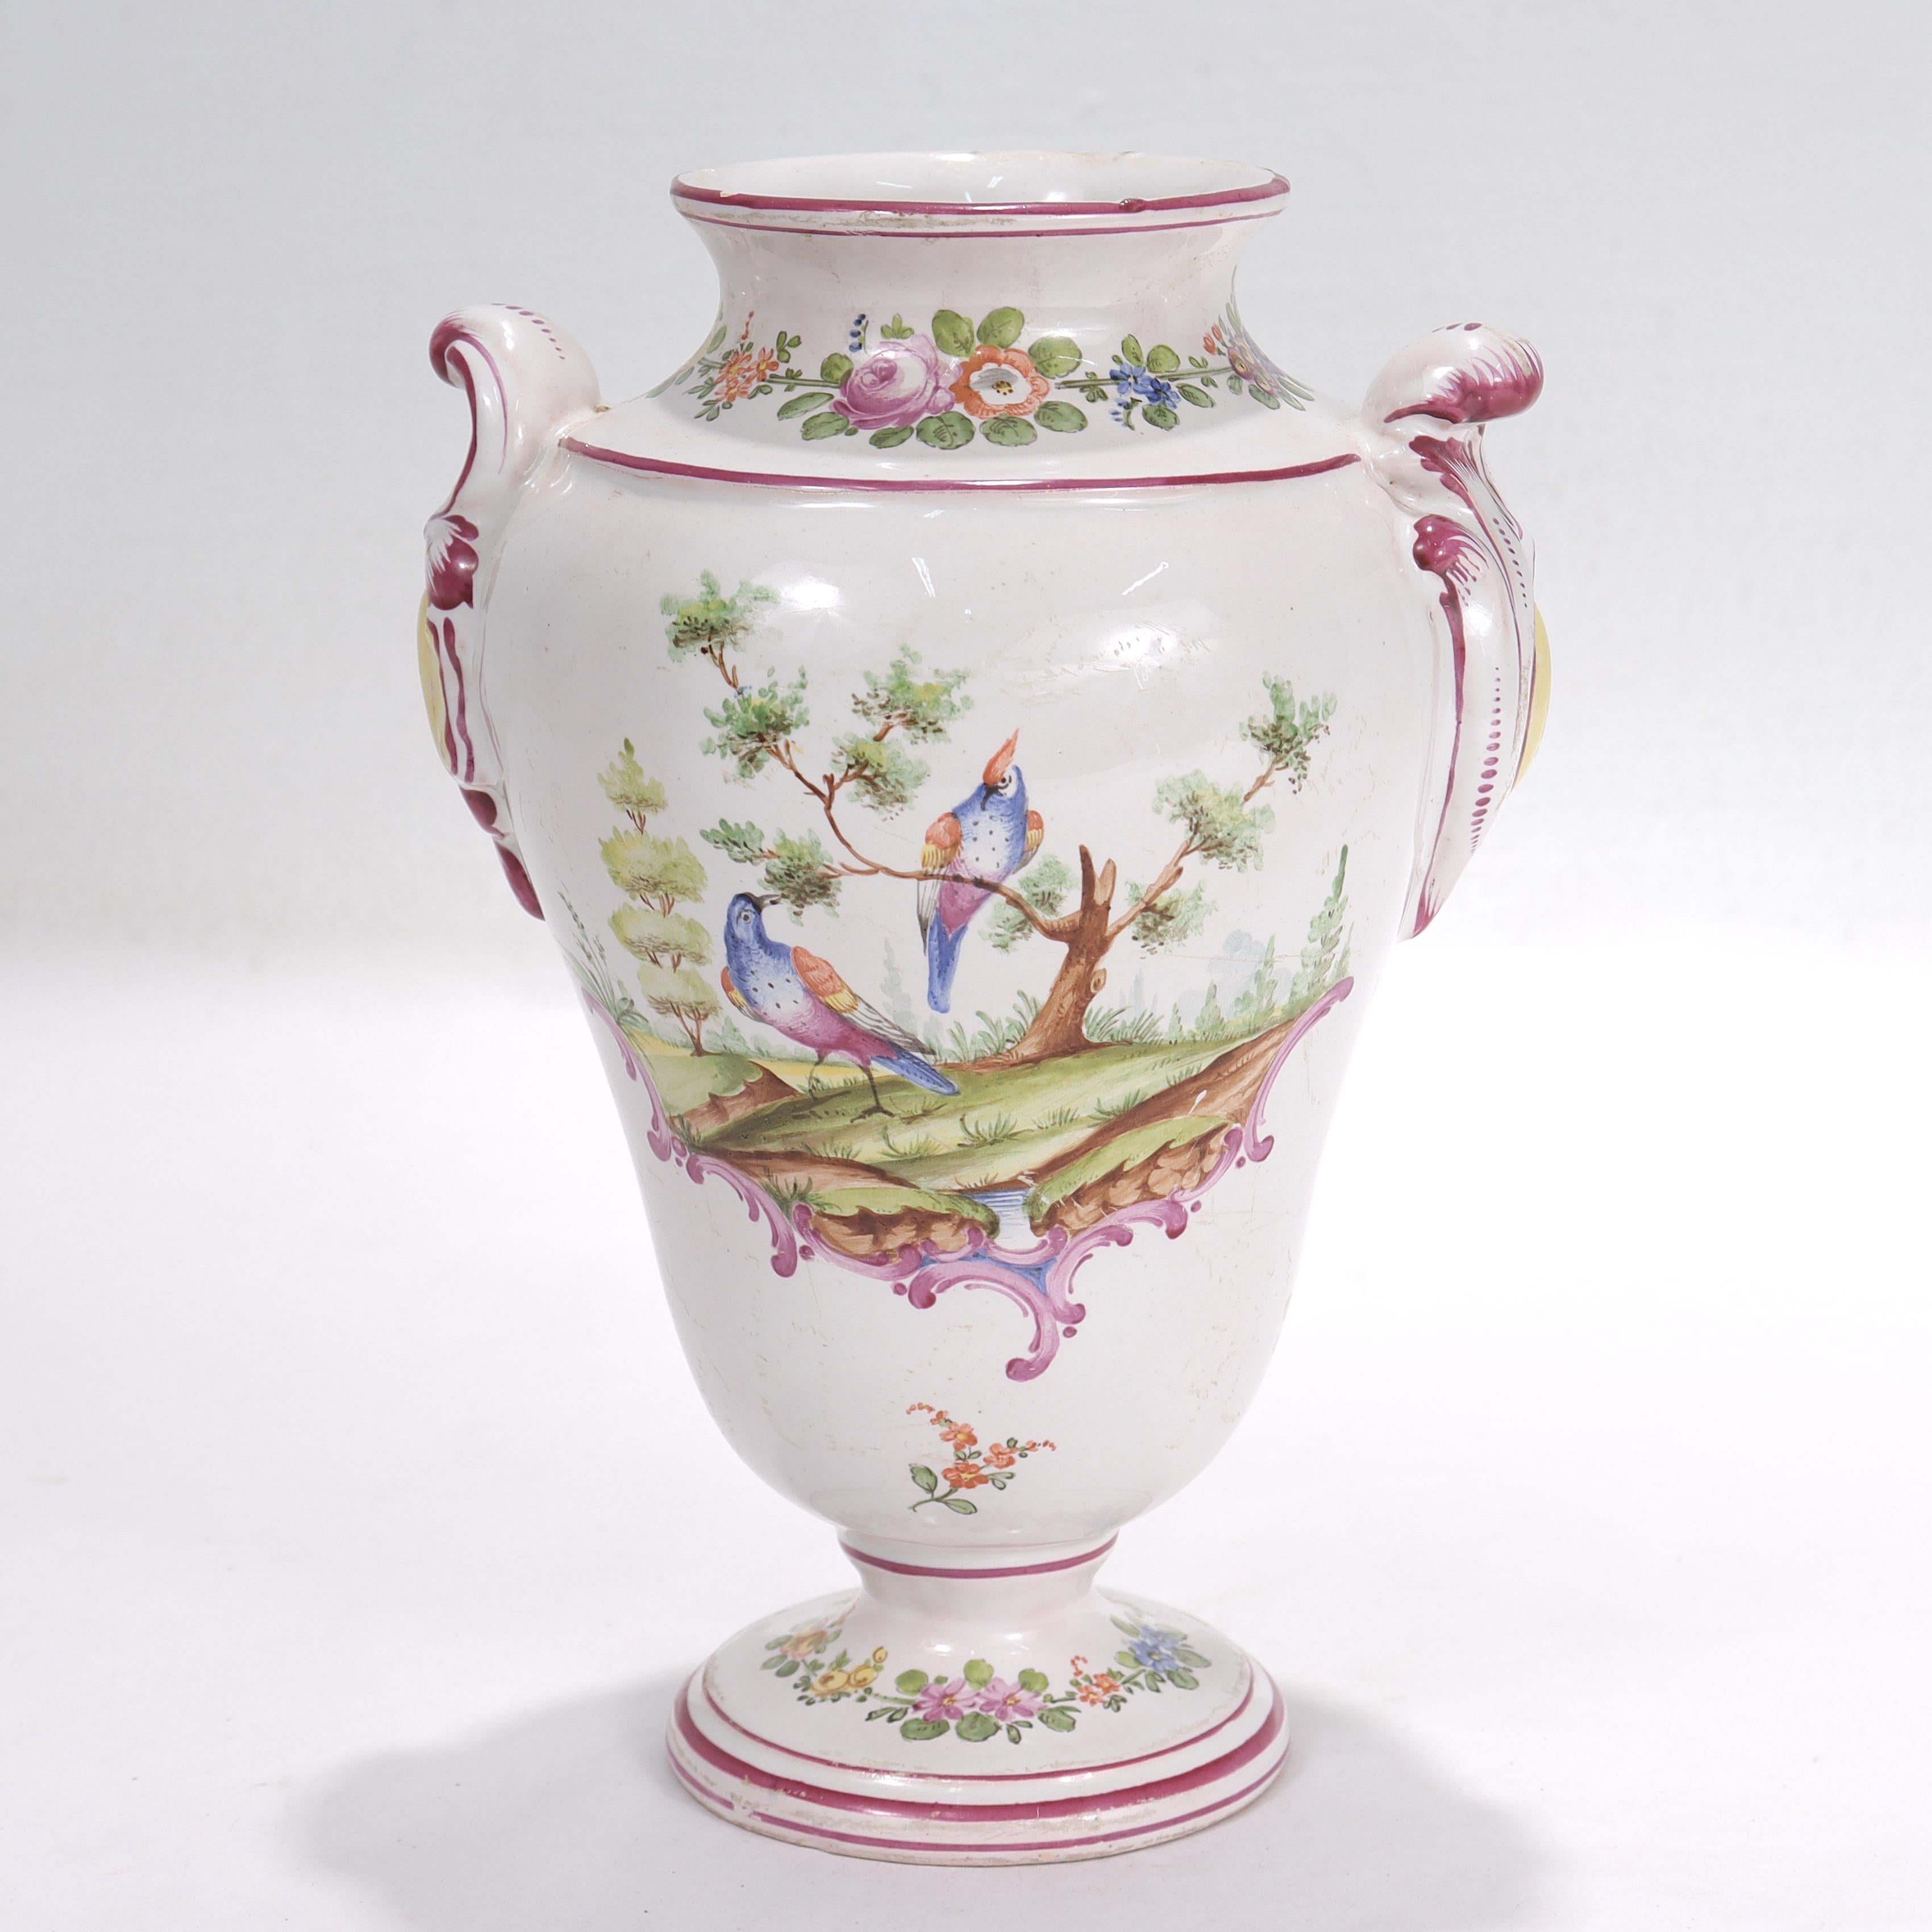 A fine antique French faience vase.

By Aprey.

Decorated throughout with floral devices and purple accents with a nature scene of two birds to one side.

With two rocaille handles.

Simply a great vase from Aprey!

Date:
Late 18th or